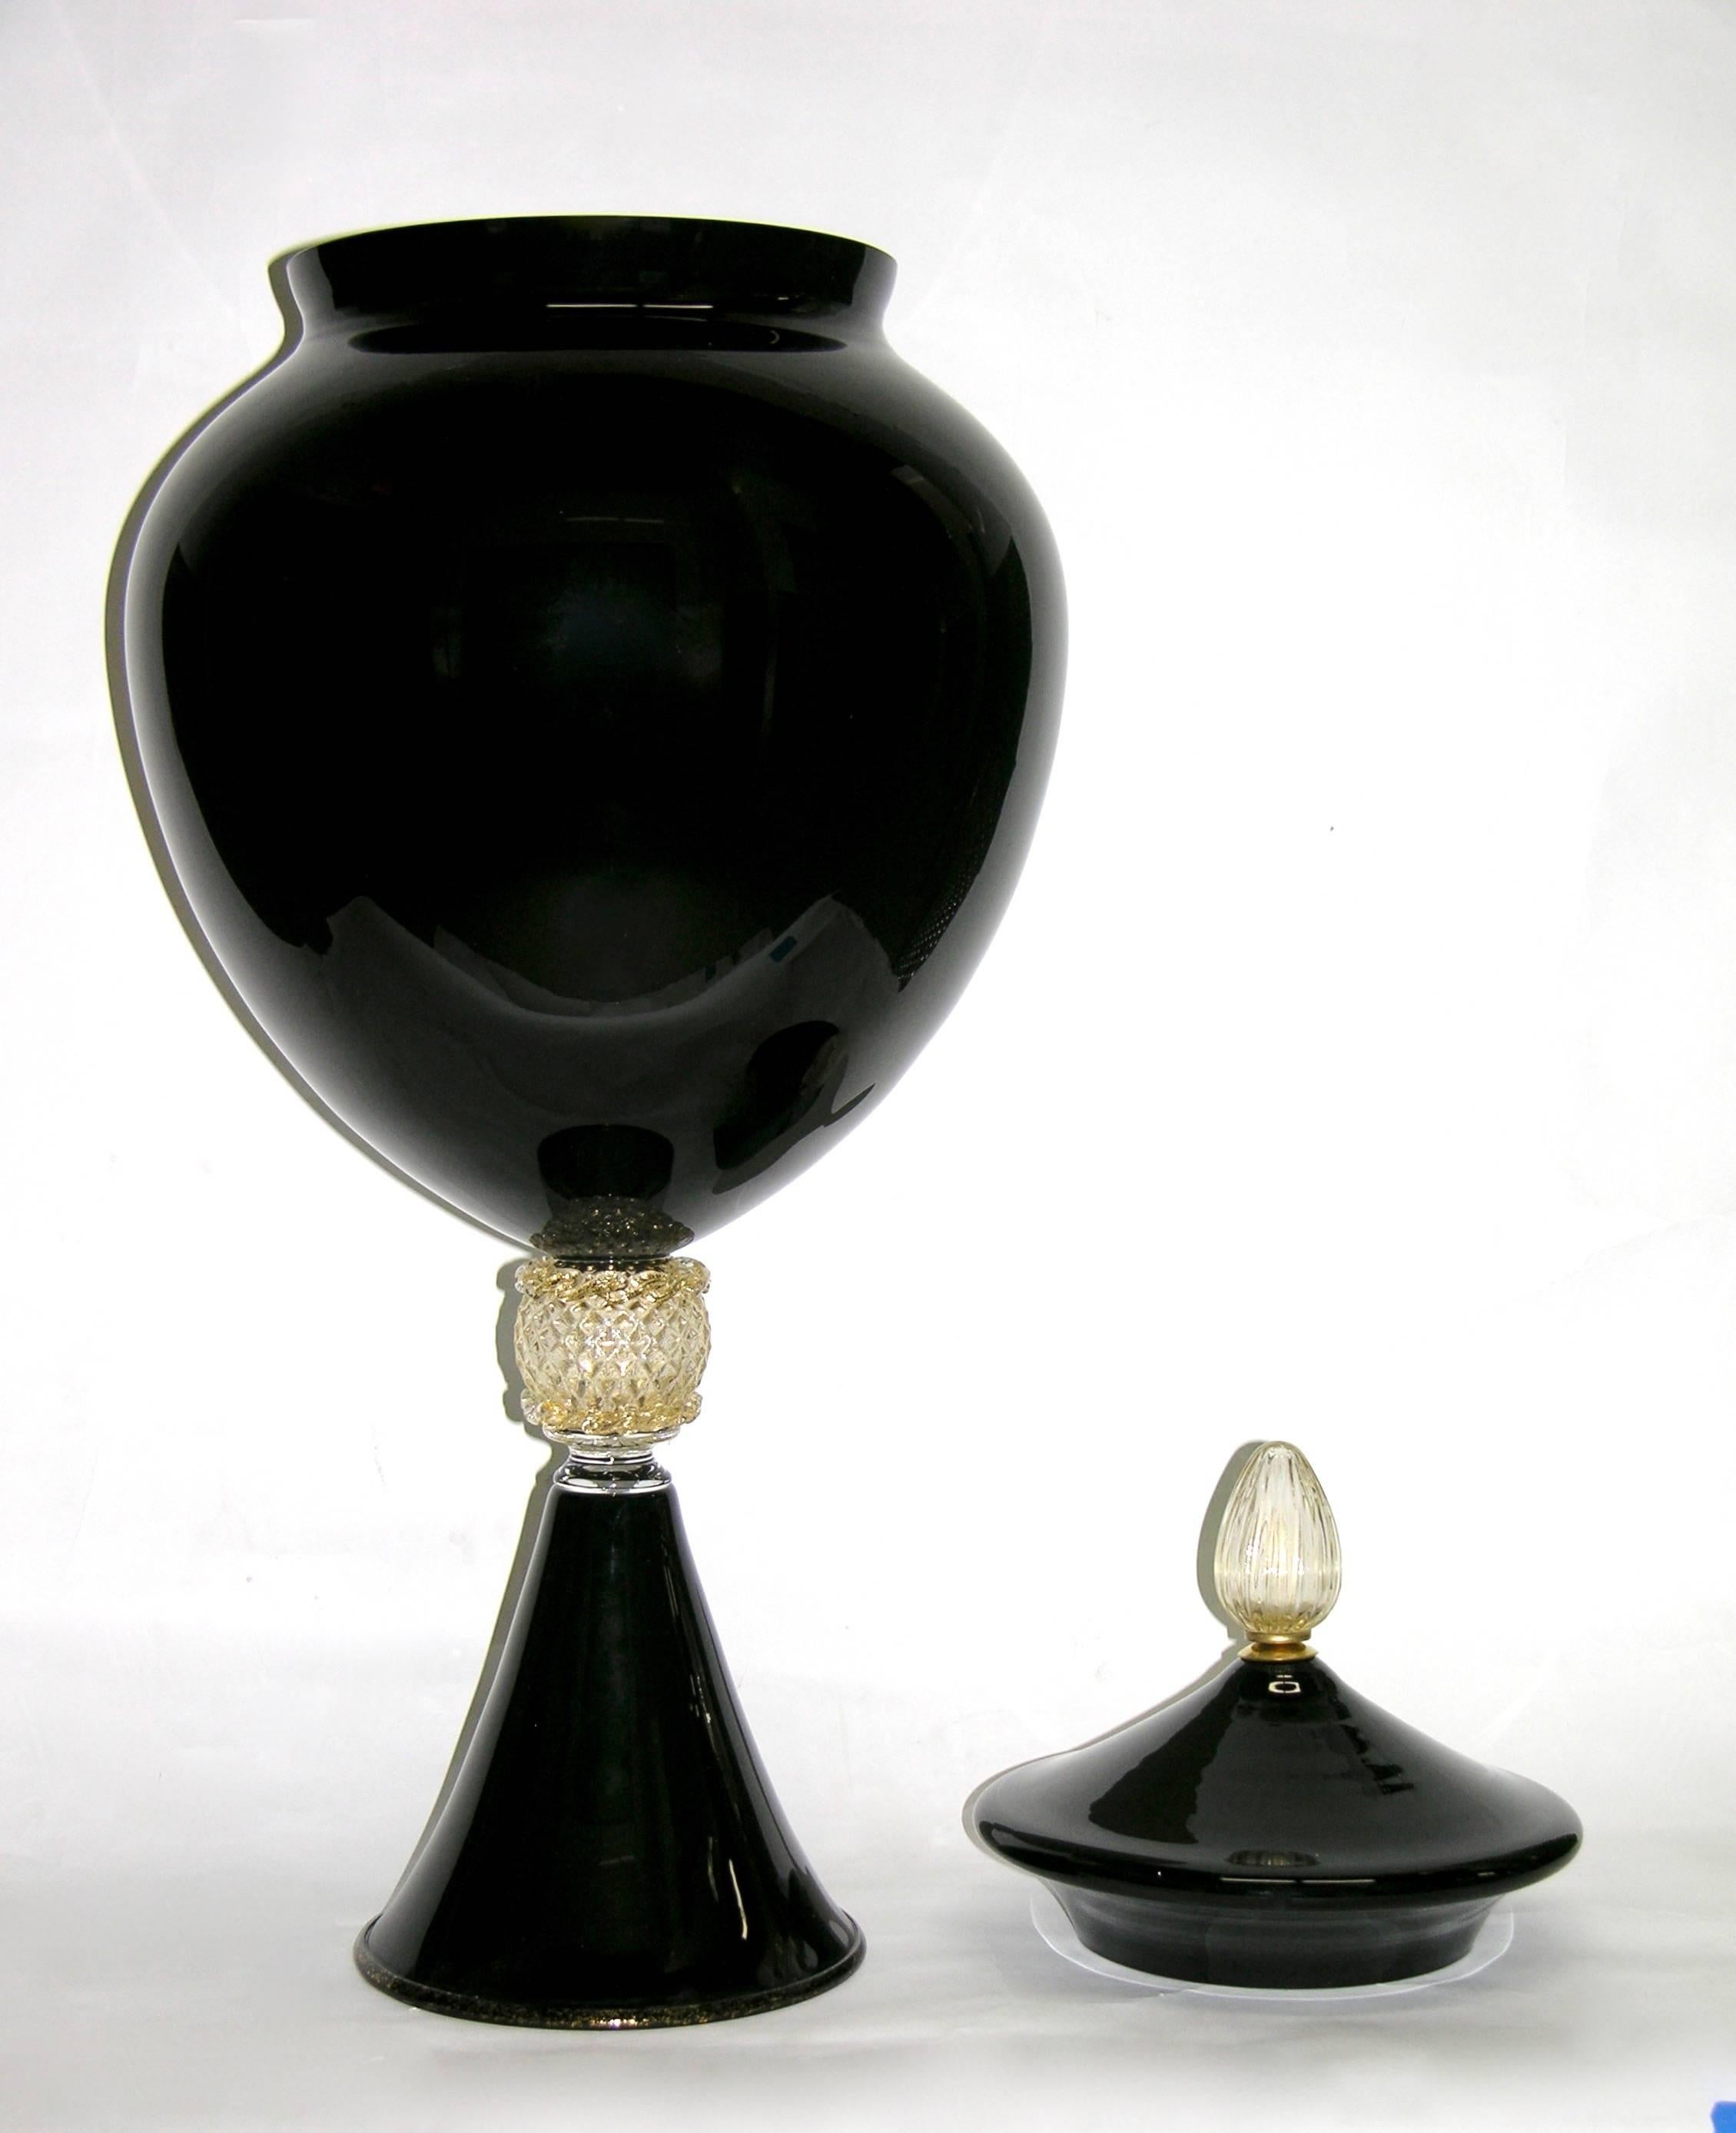 Hand-Crafted 1980 Italian Pair of Tall Black and Gold Glass Vases / Urns Attributed to Venini